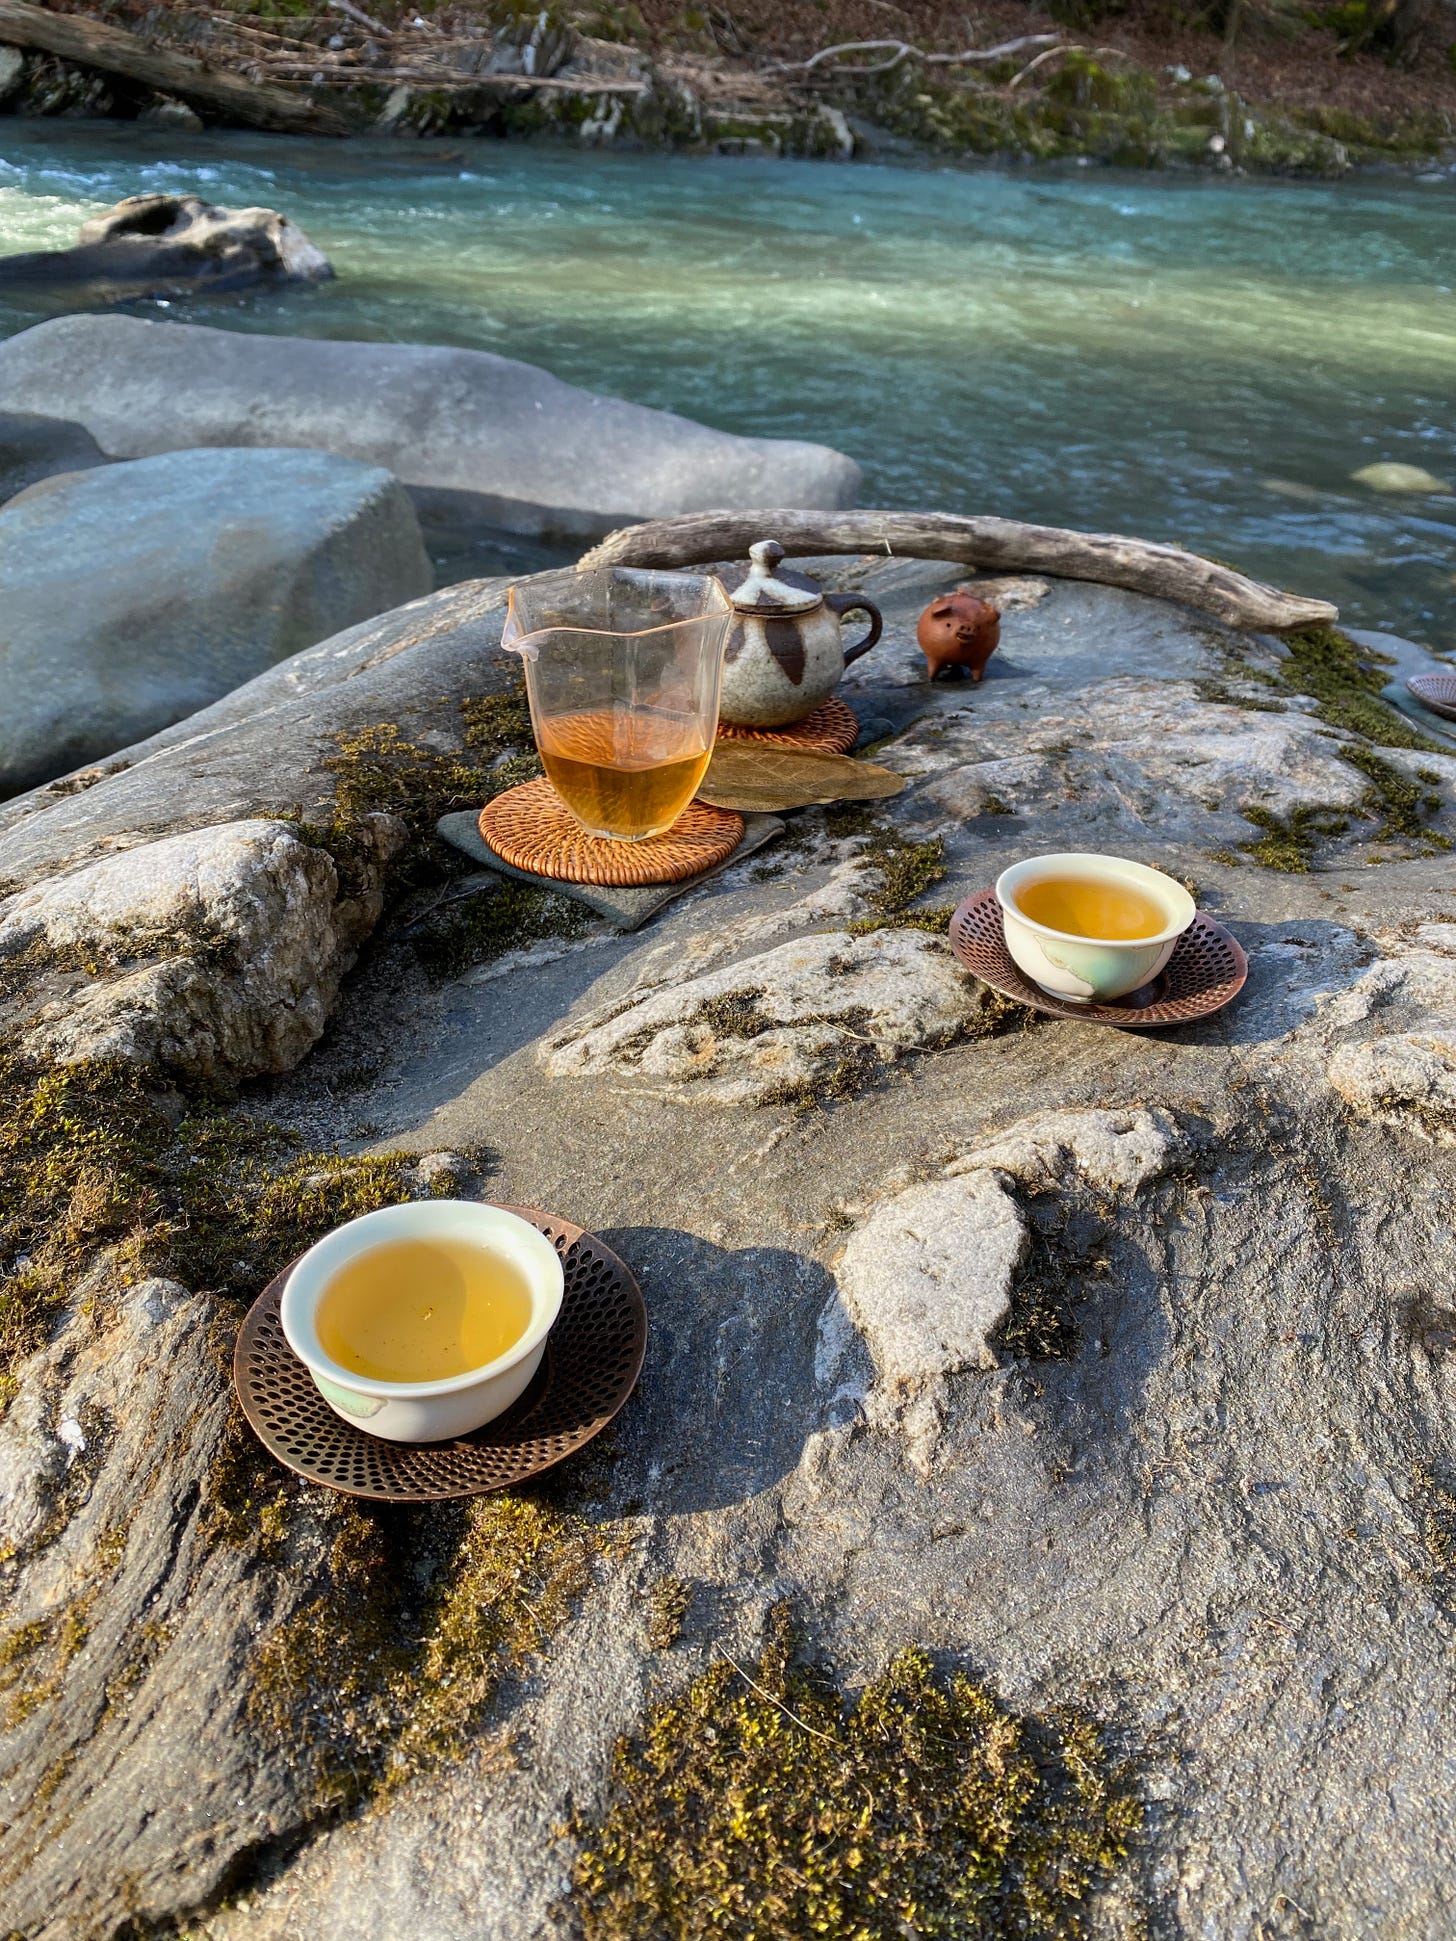 A selection of teaware sits on a large flat rock at the edge of a rushing river: two small ceramic cups filled with golden tea, a glass pitcher filled with the same tea, a small ceramic teapot, and a brown pig figurine. 